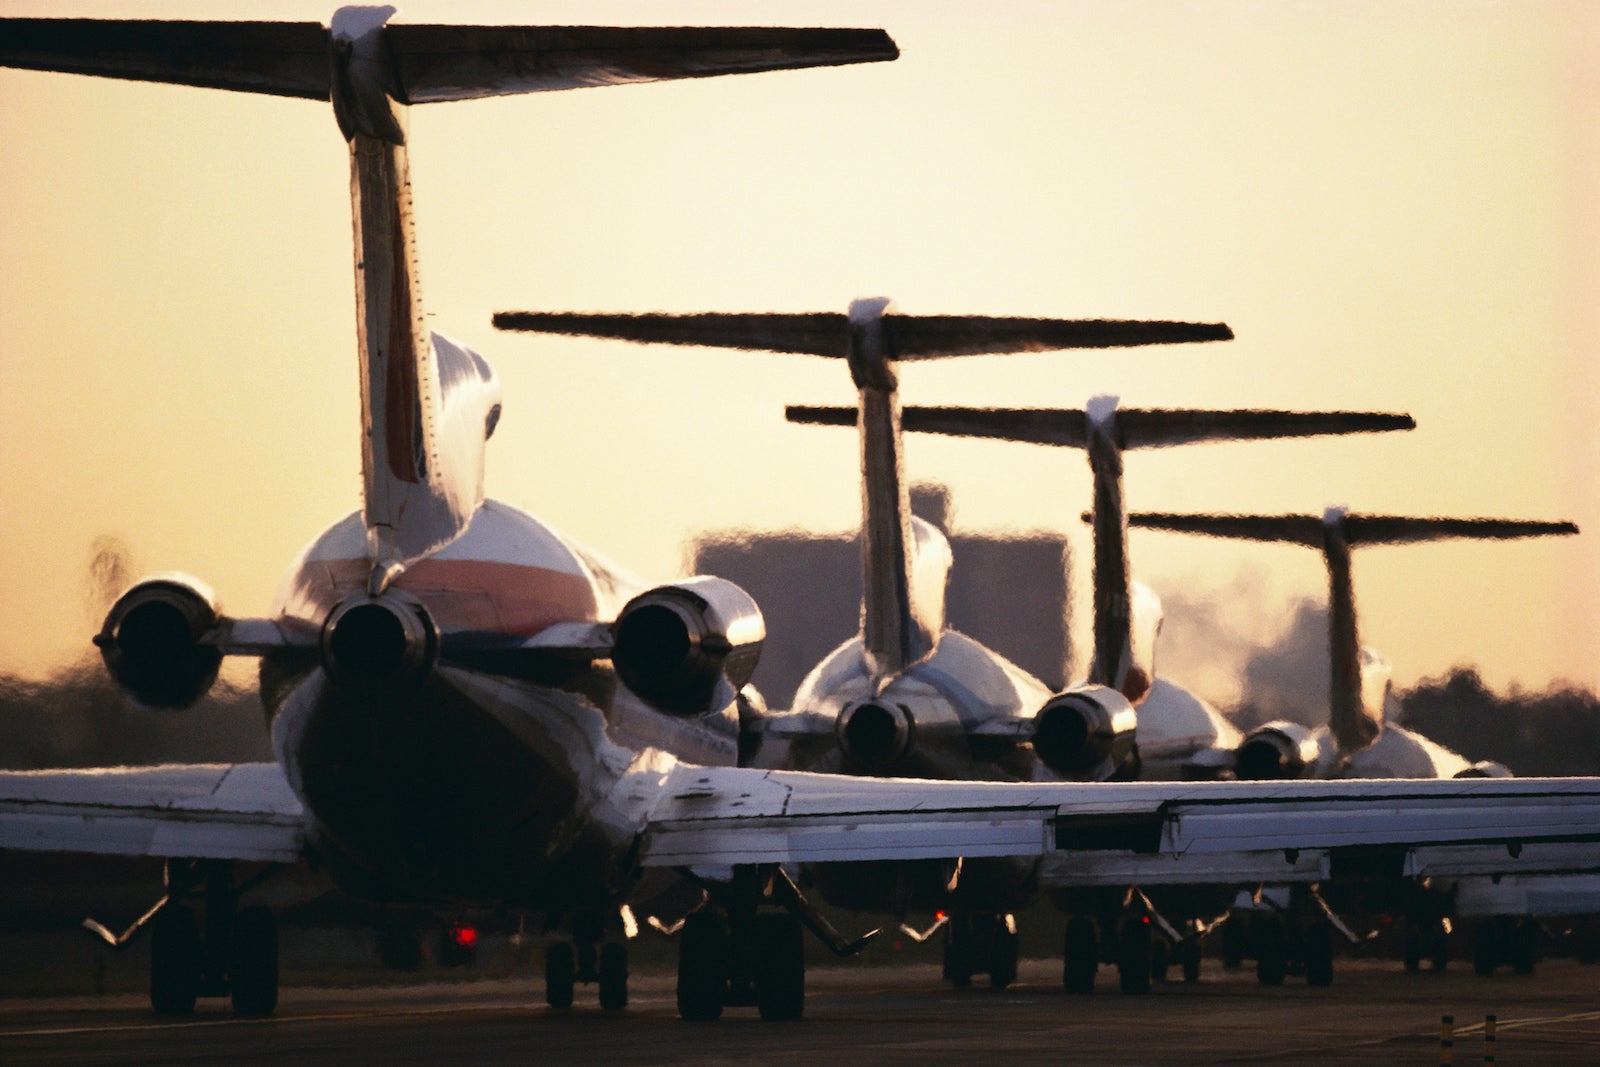 Airline Jets Lined up on Runway